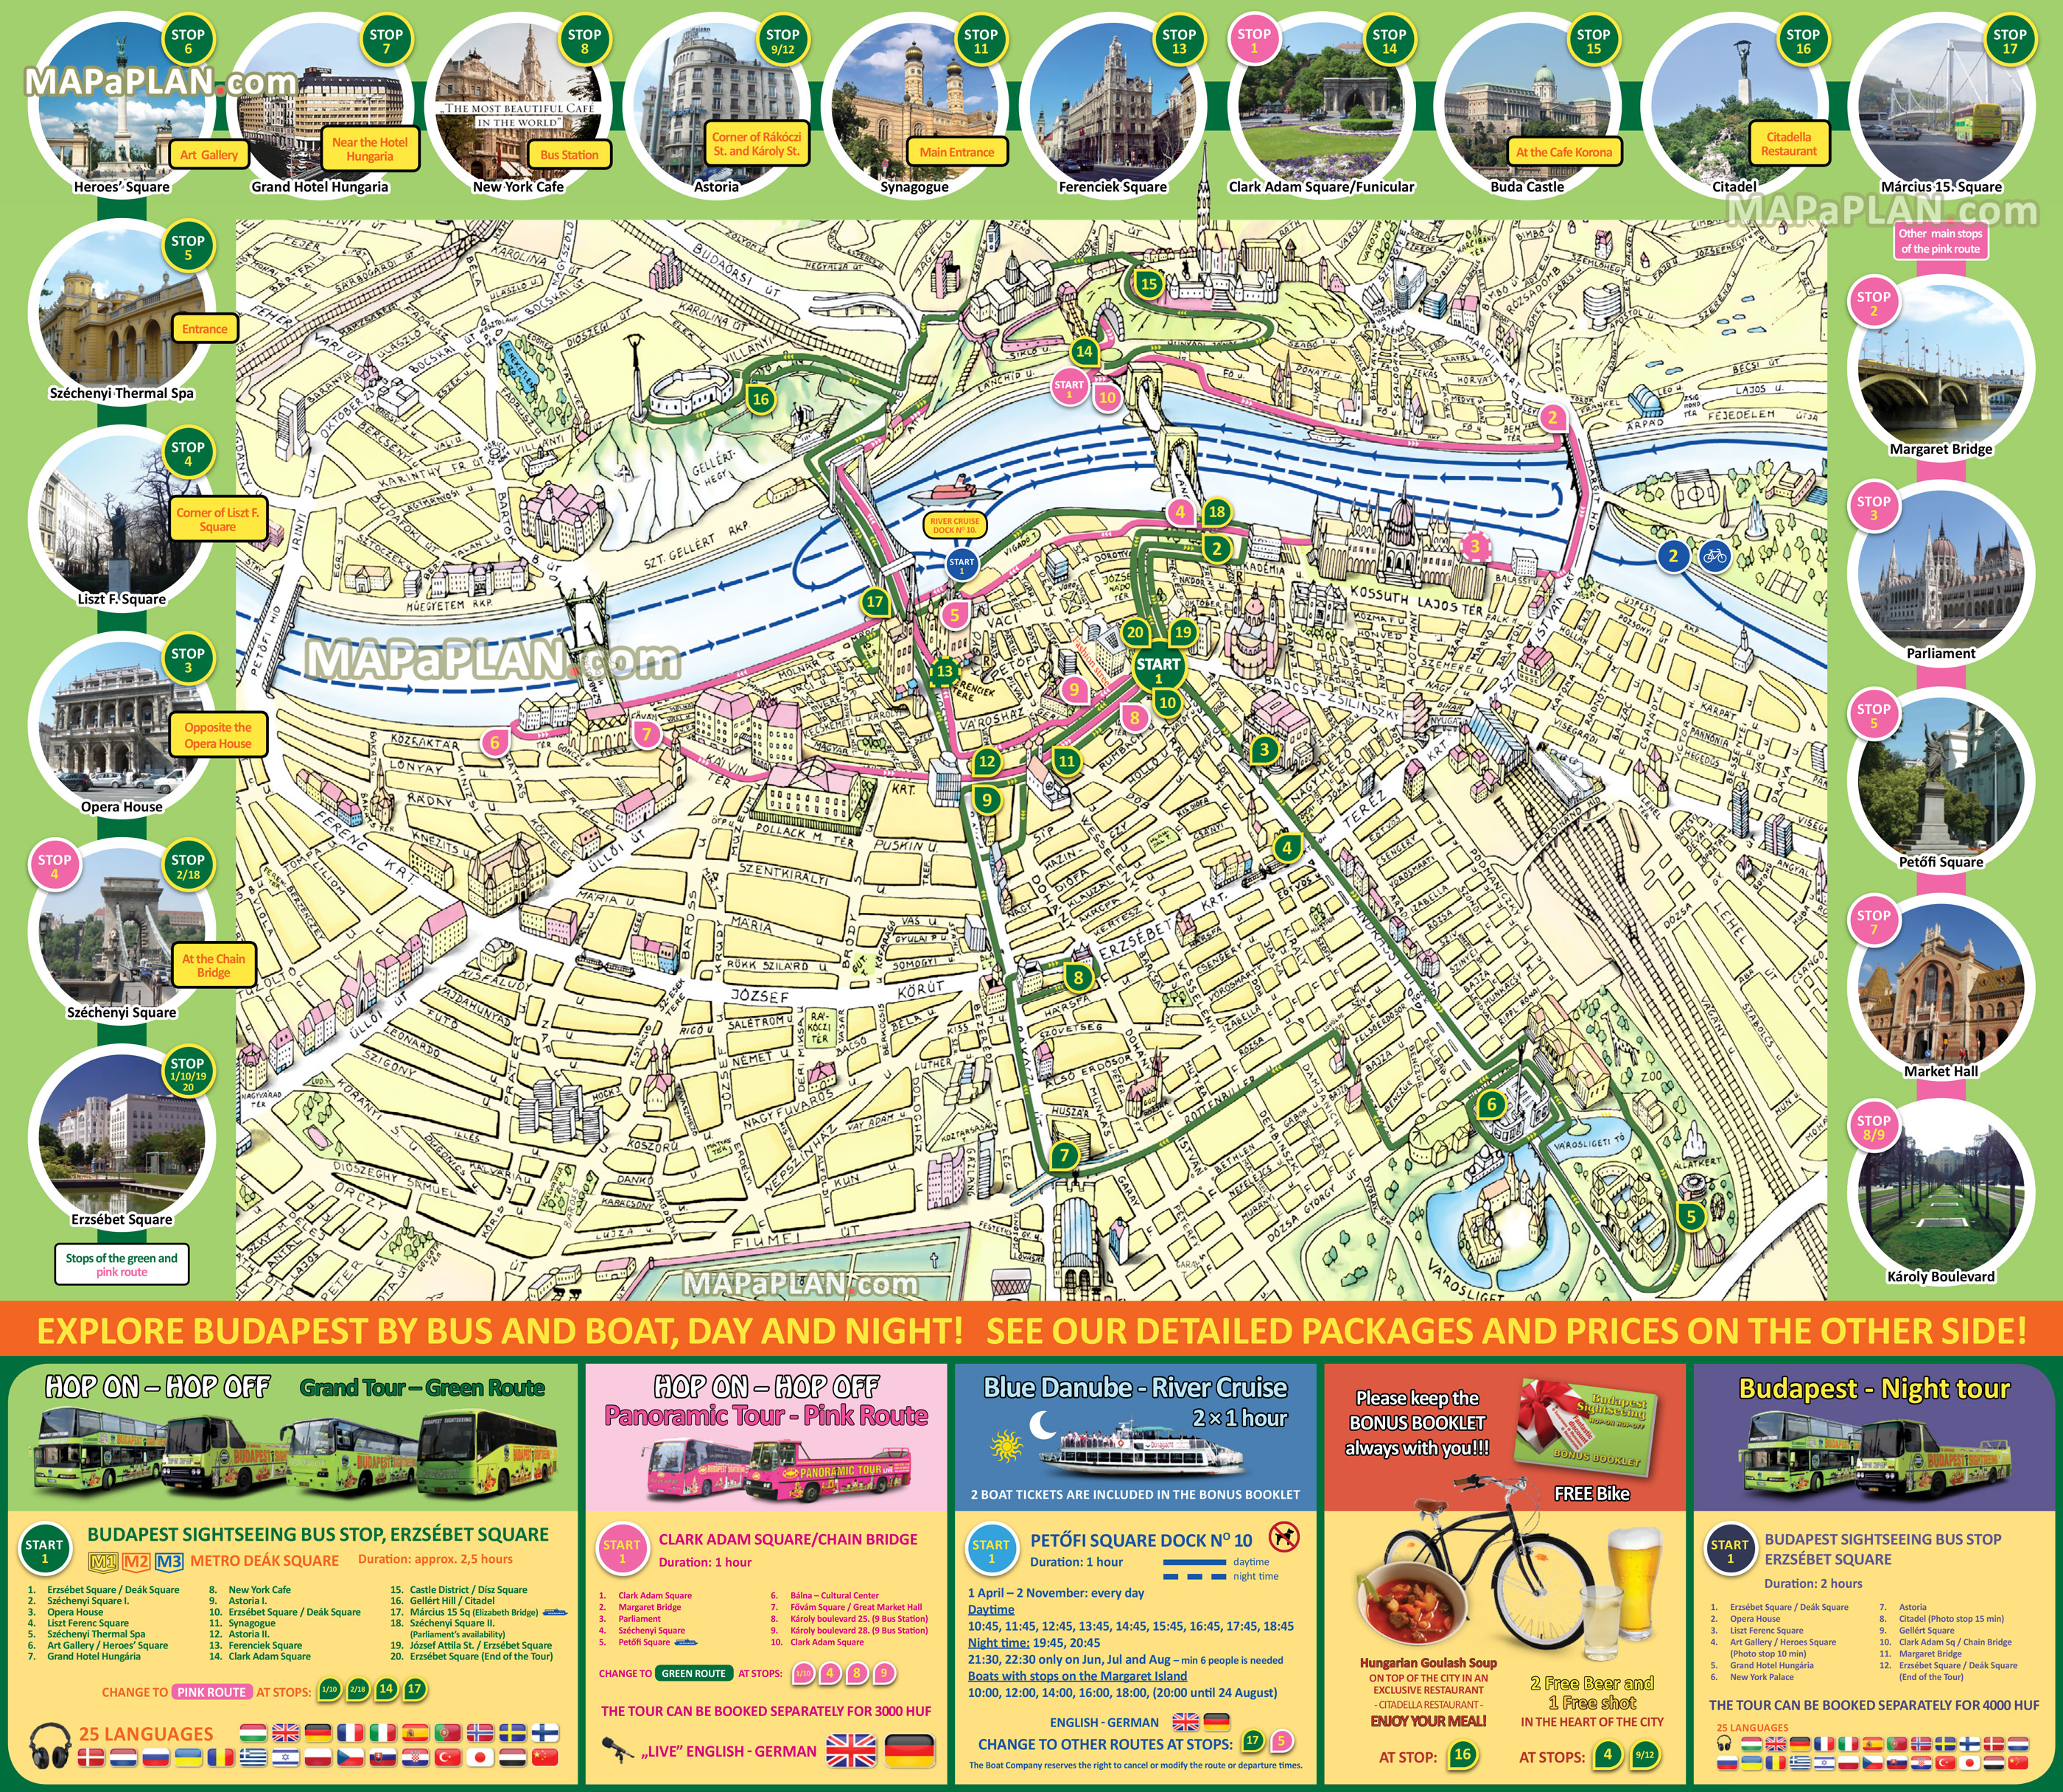 old town hop on hop off pink green bus tour routes diagram royal castle hill heroes square Budapest top tourist attractions map